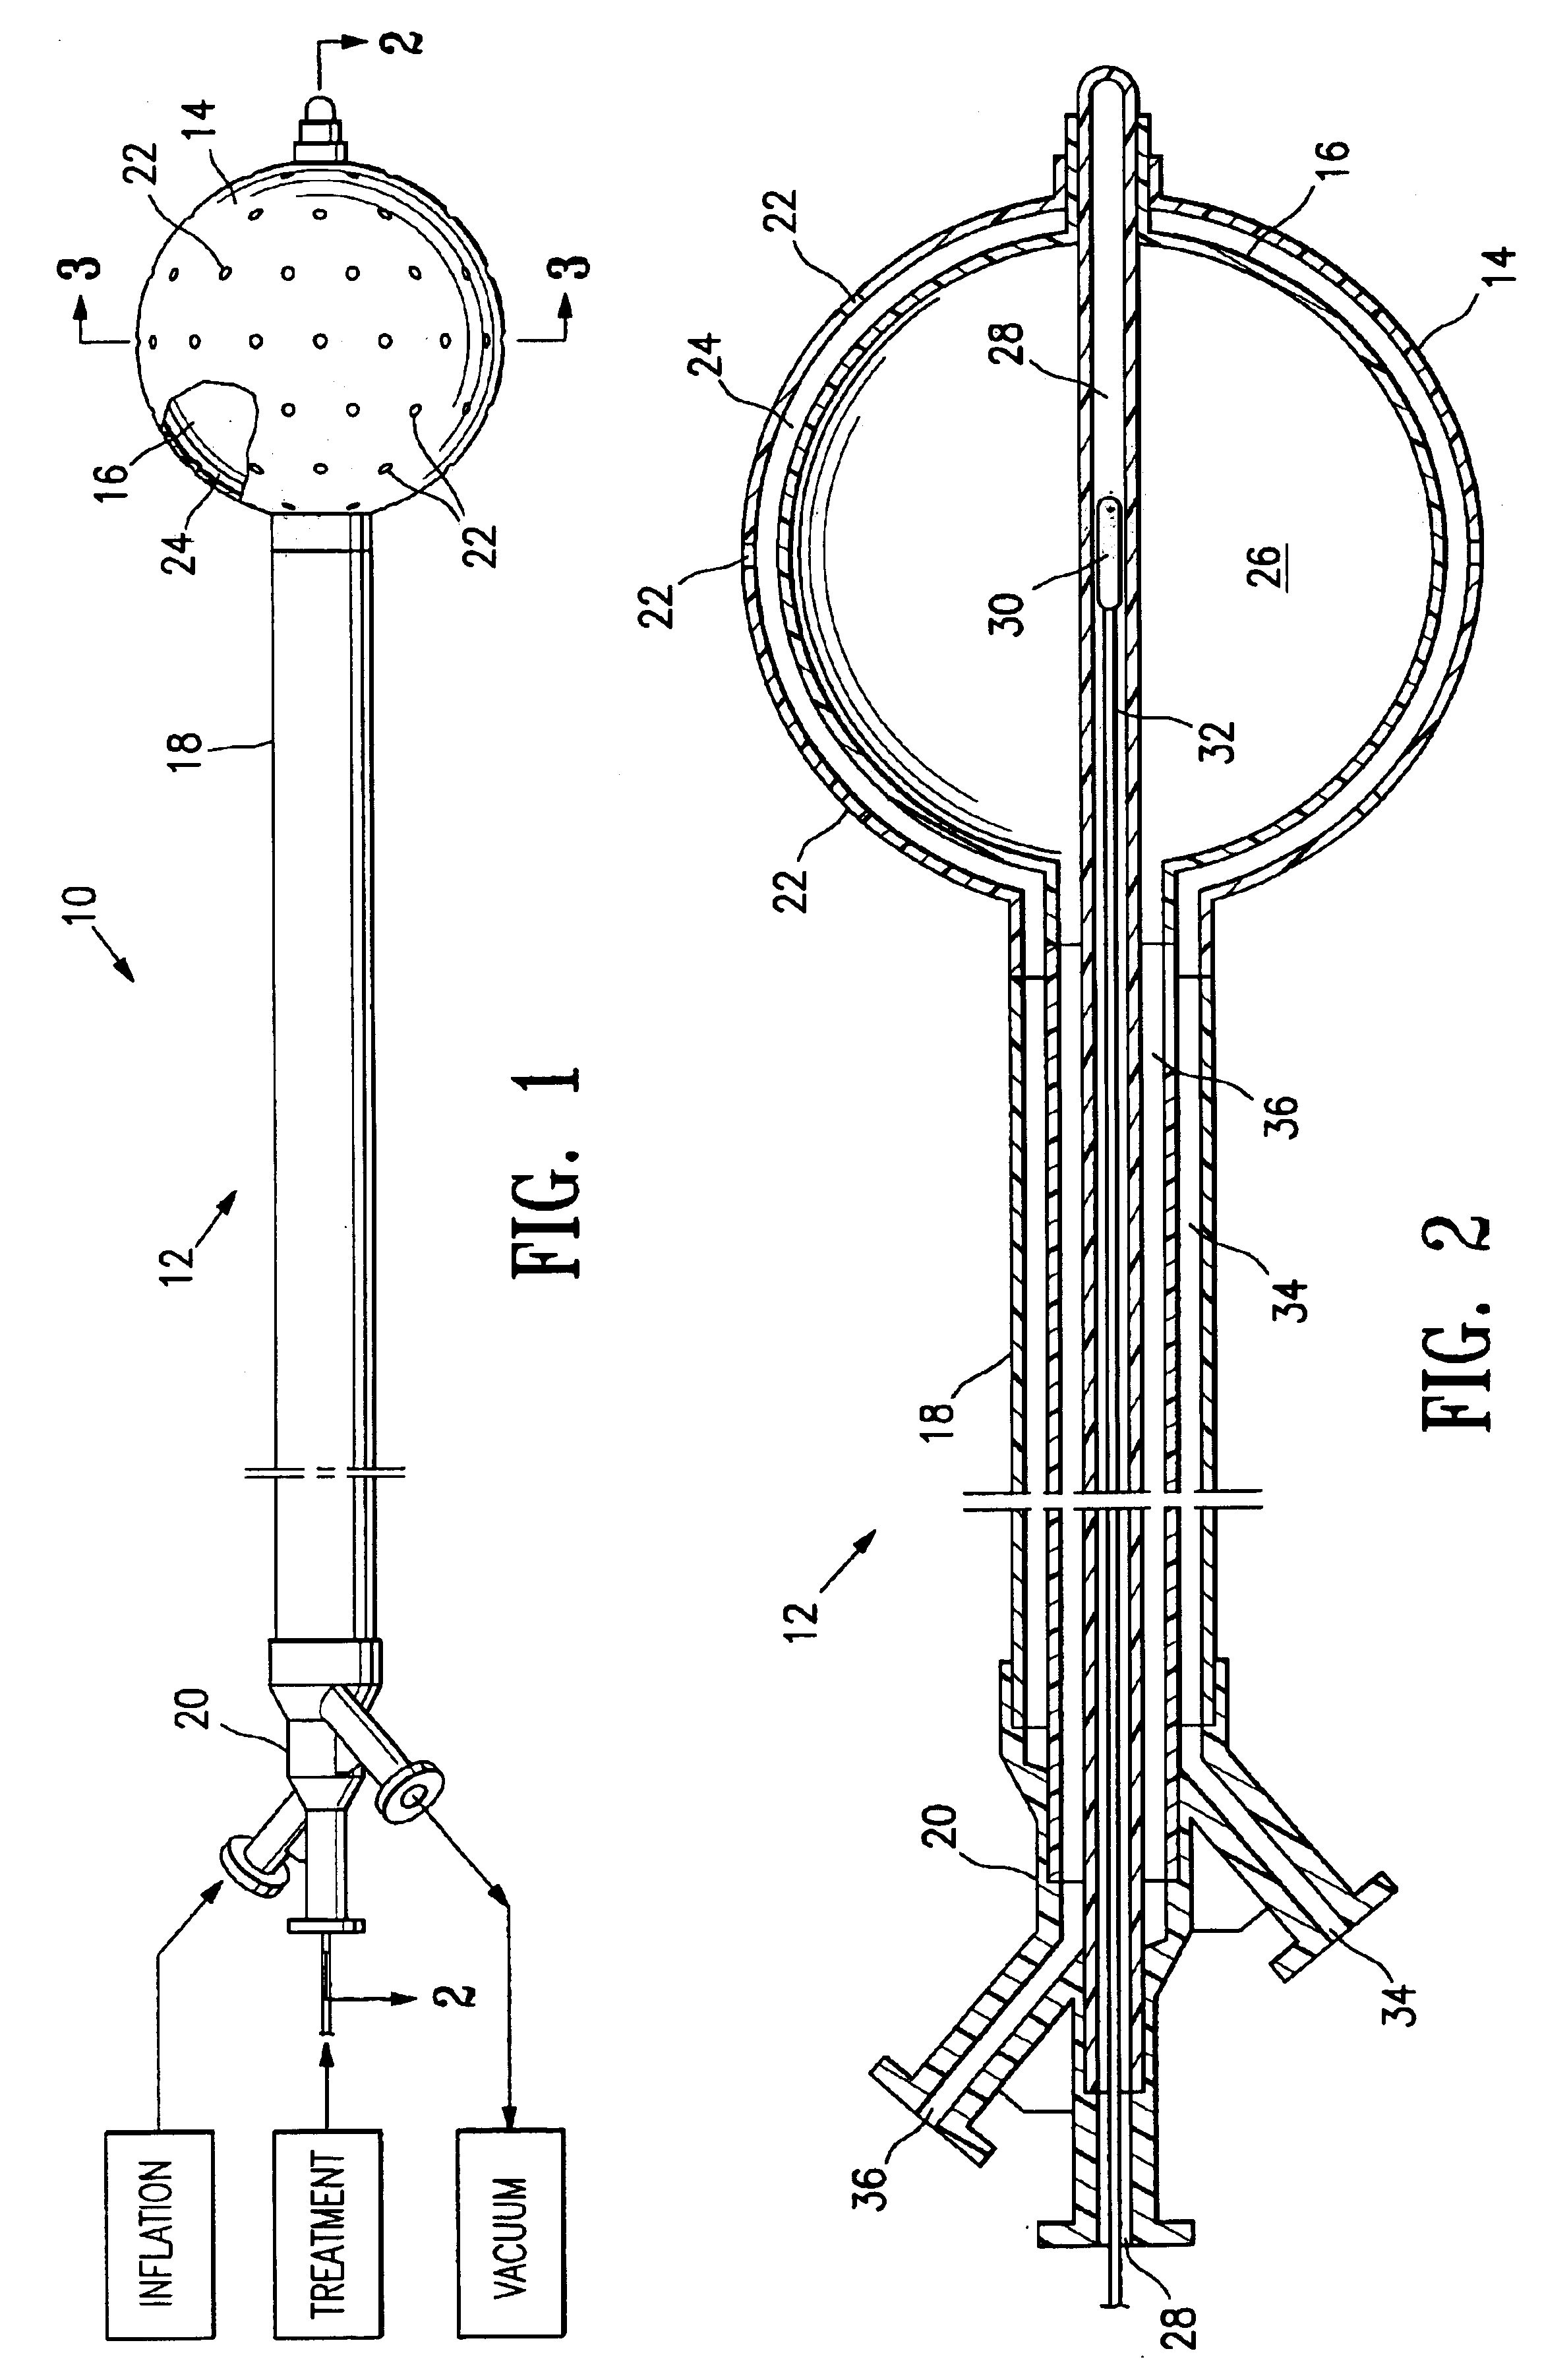 Vacuum device and method for treating tissue adjacent a body cavity